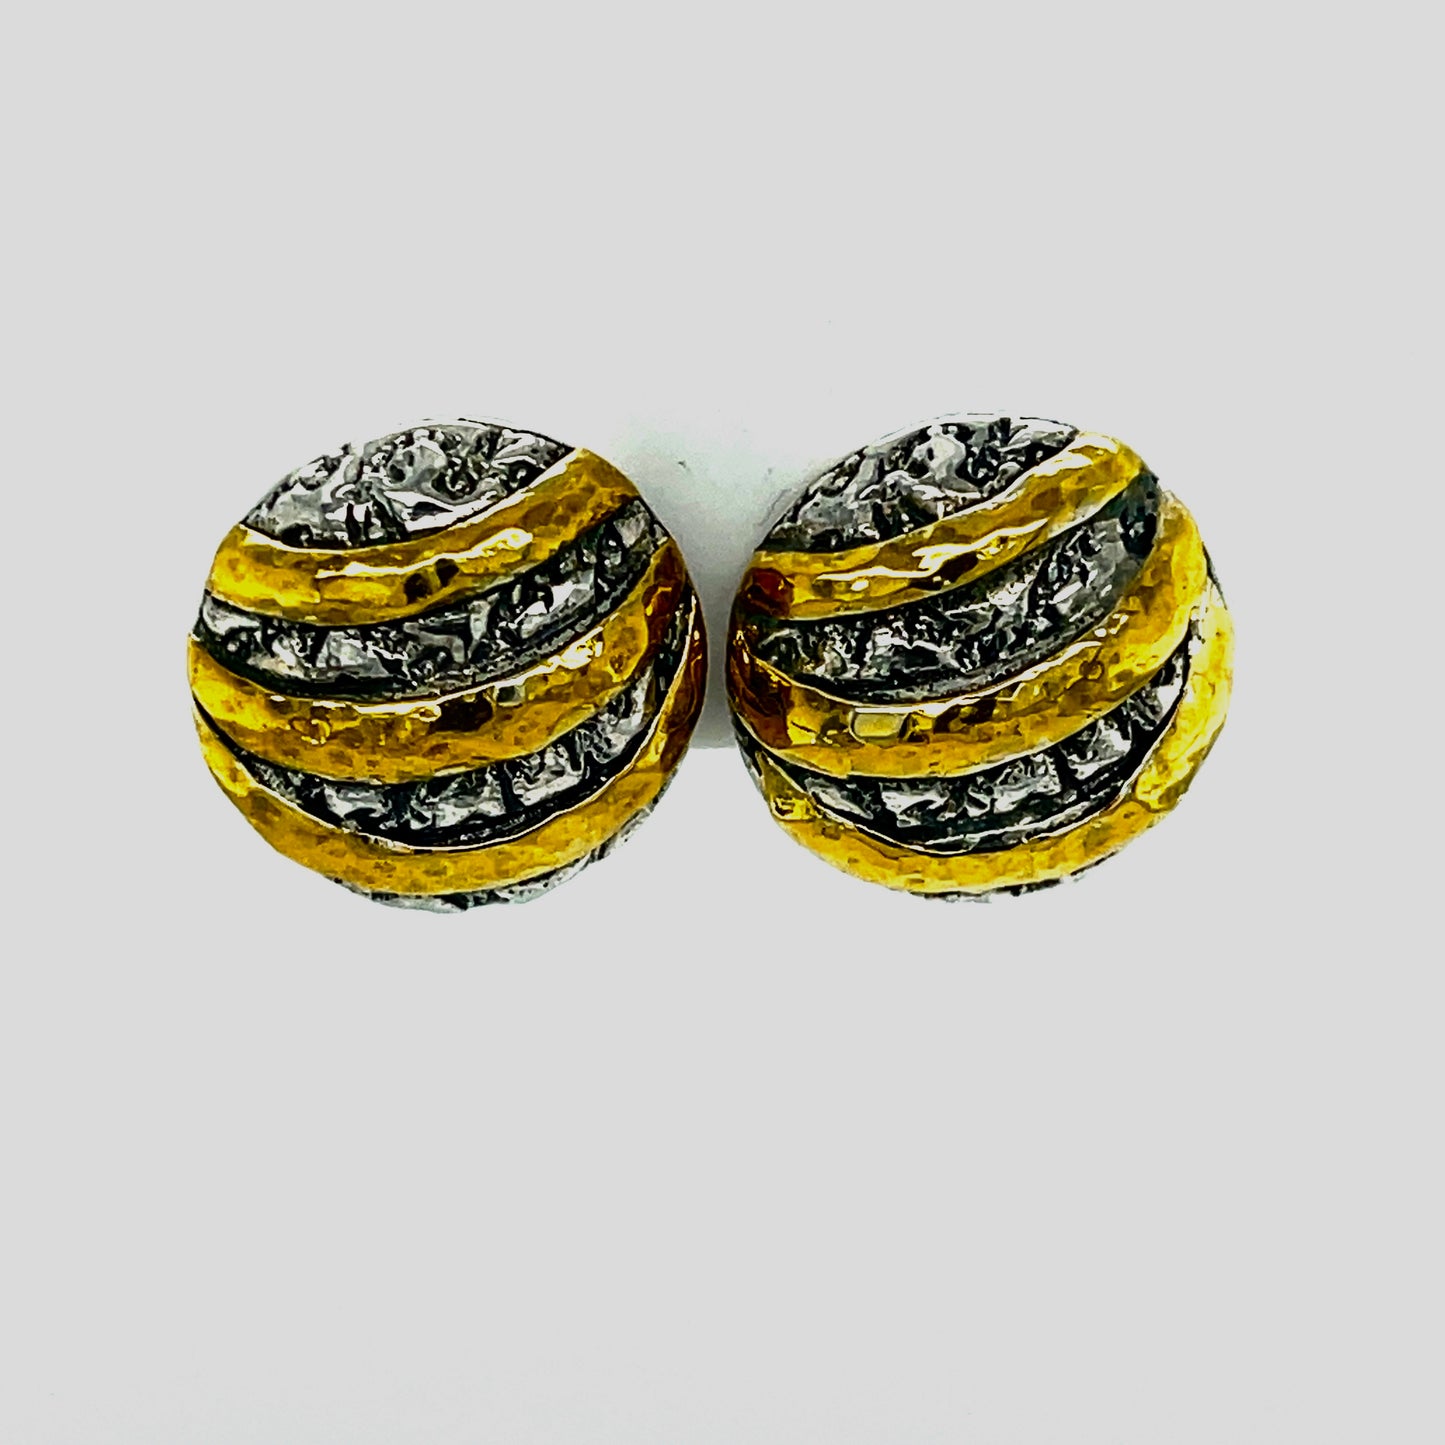 18kt Gold and Silver stud earrings